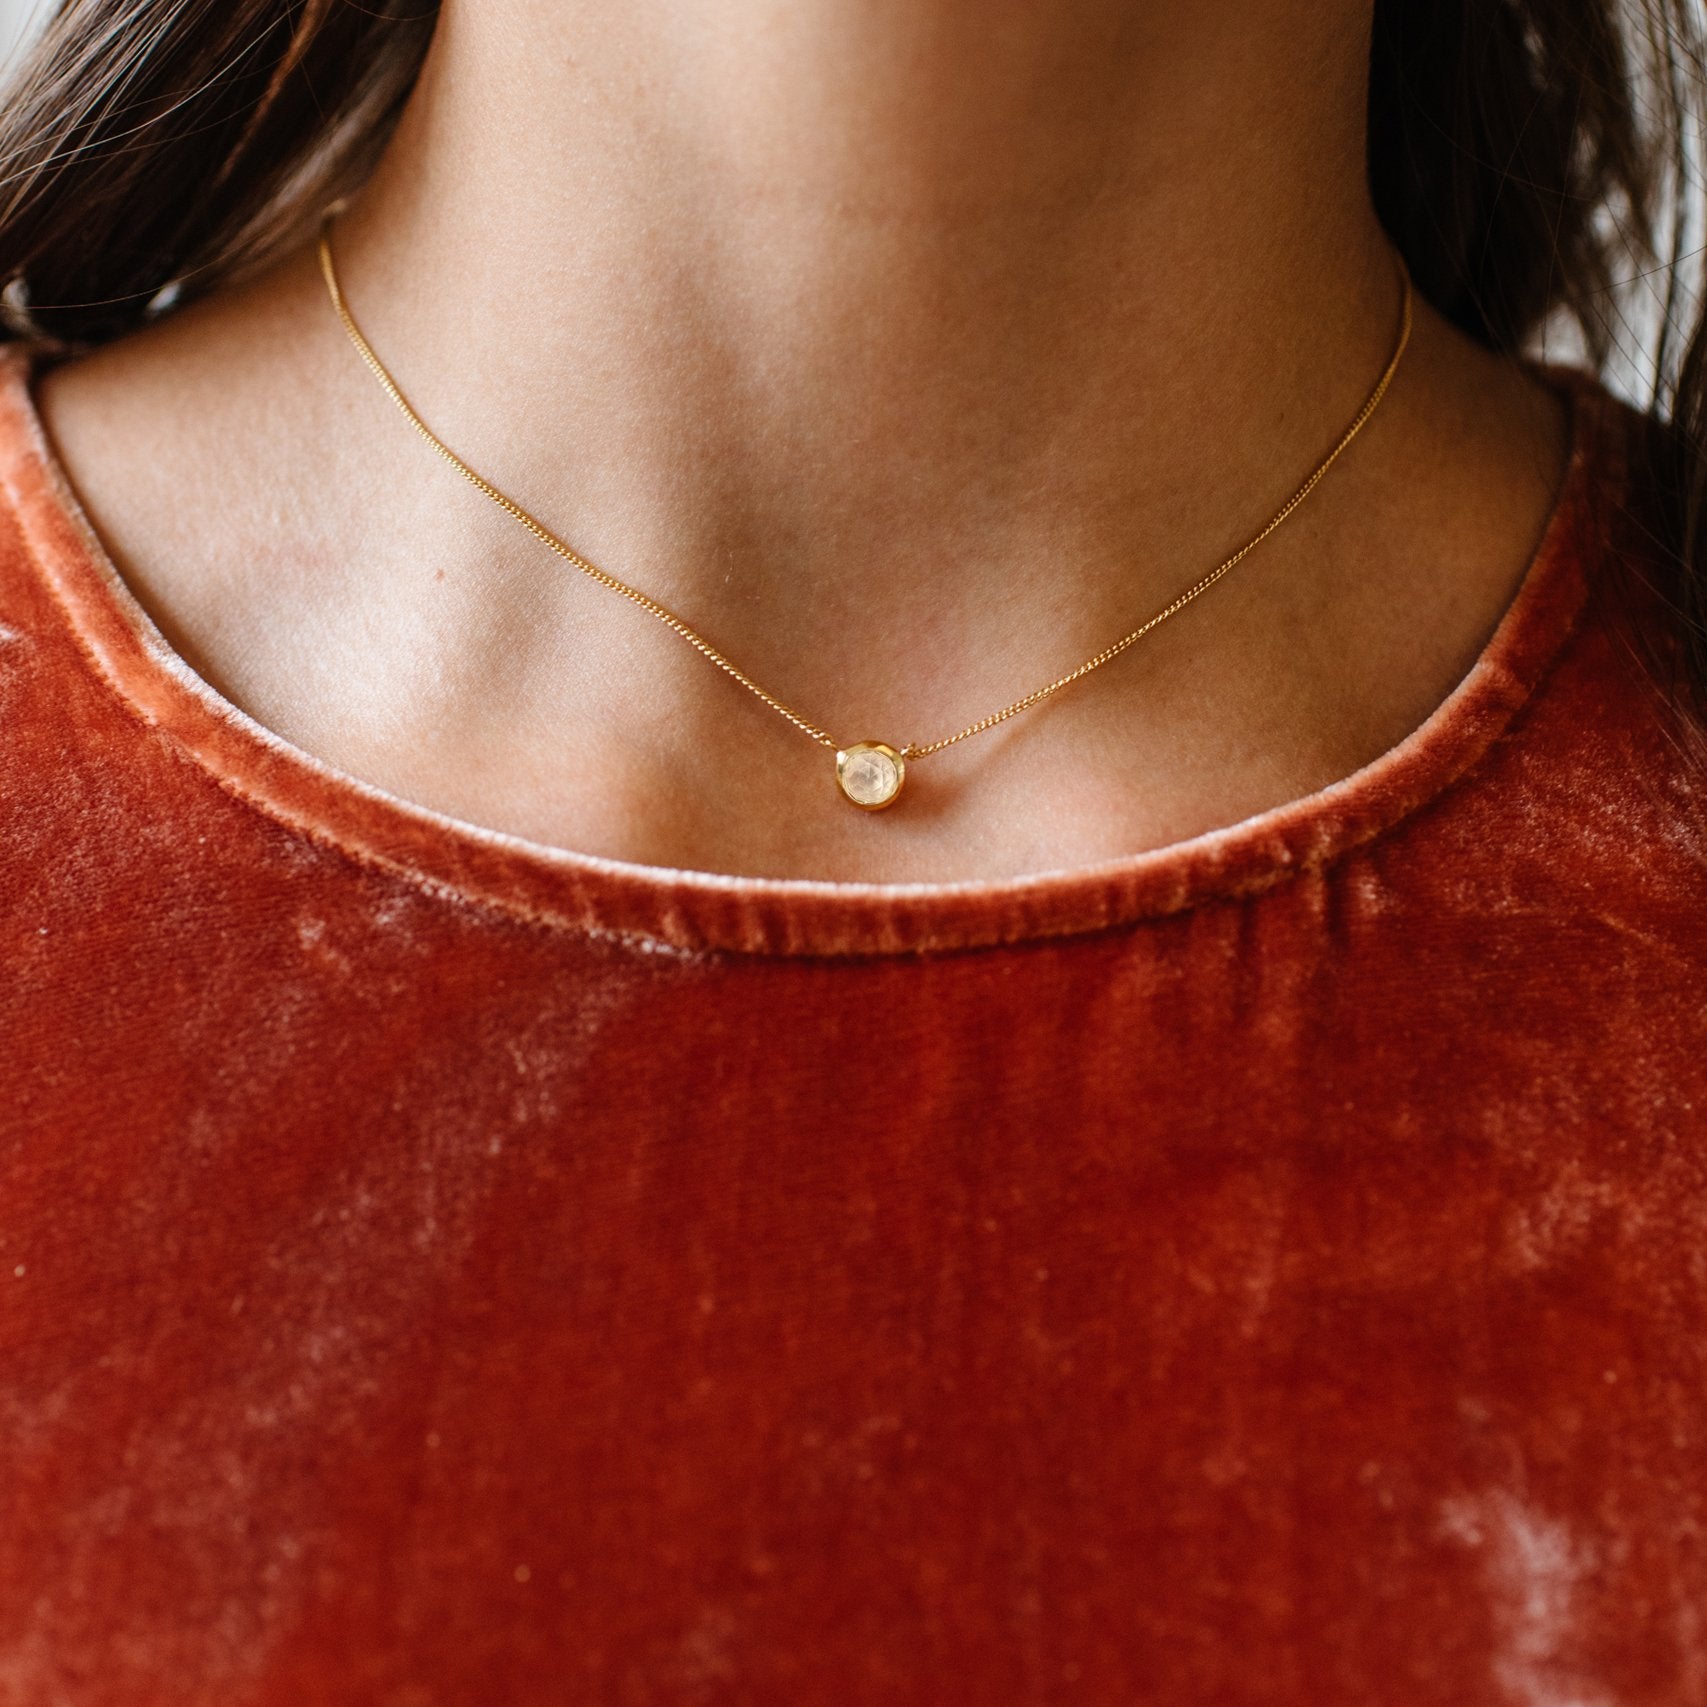 DAINTY LEGACY NECKLACE - WHITE TOPAZ & GOLD - SO PRETTY CARA COTTER